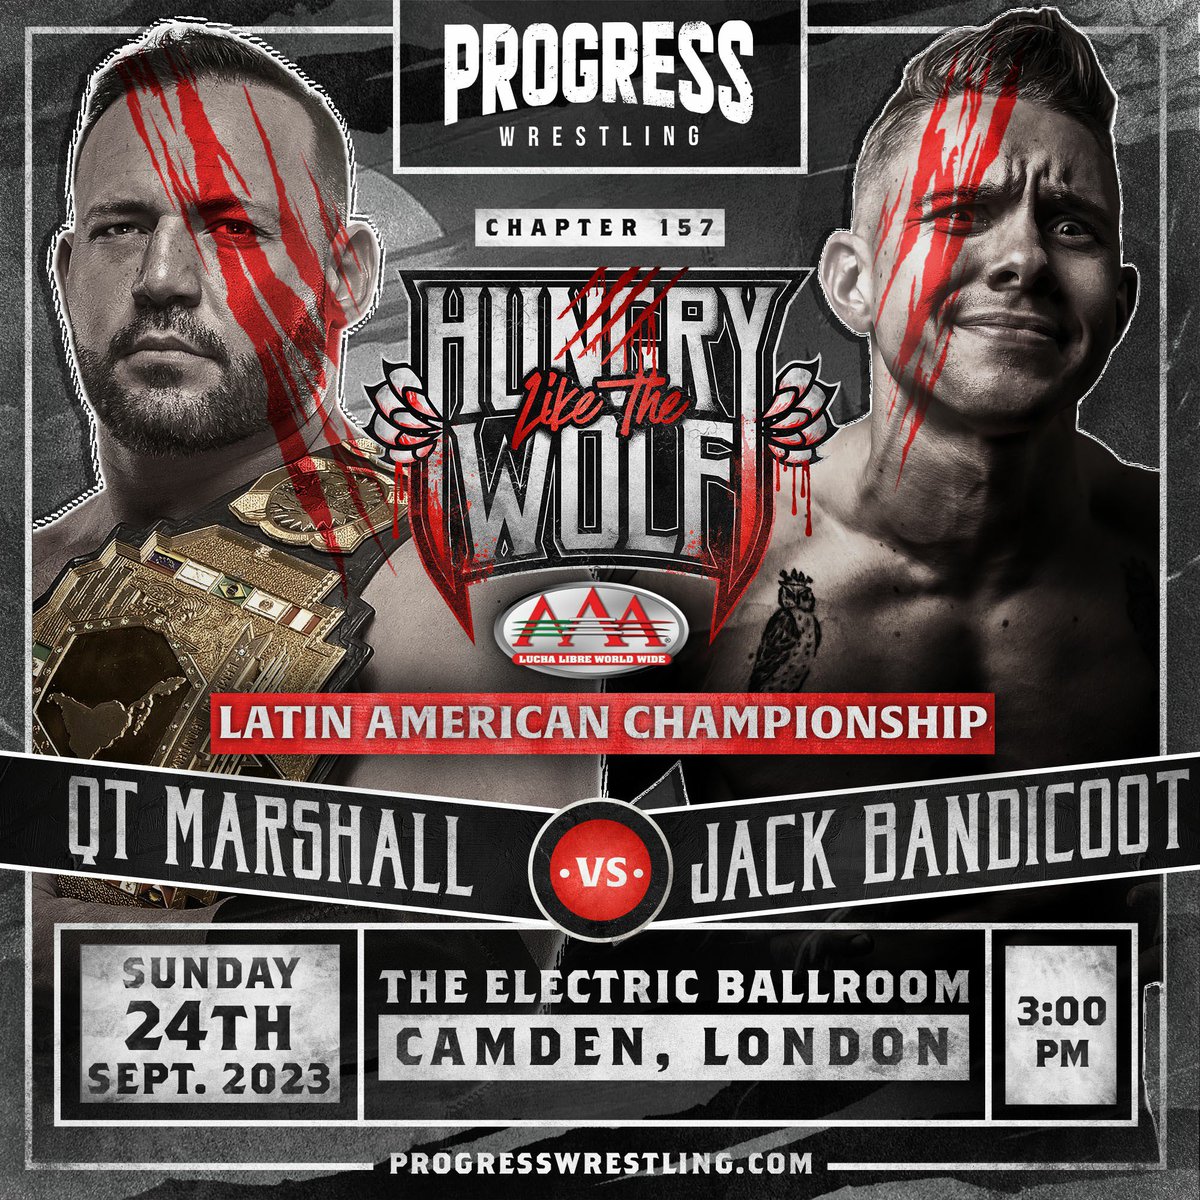 🐺 HUNGRY LIKE THE WOLF ‼️ MATCH ANNOUNCEMENT 🏅 QT Marshall will be defending the AAA Latin American Championship against Jack Bandicoot in just FOUR days time! 🎟️ Get your tickets here: bit.ly/157HLTW #PROGRESSWrestling #Wrestling #London